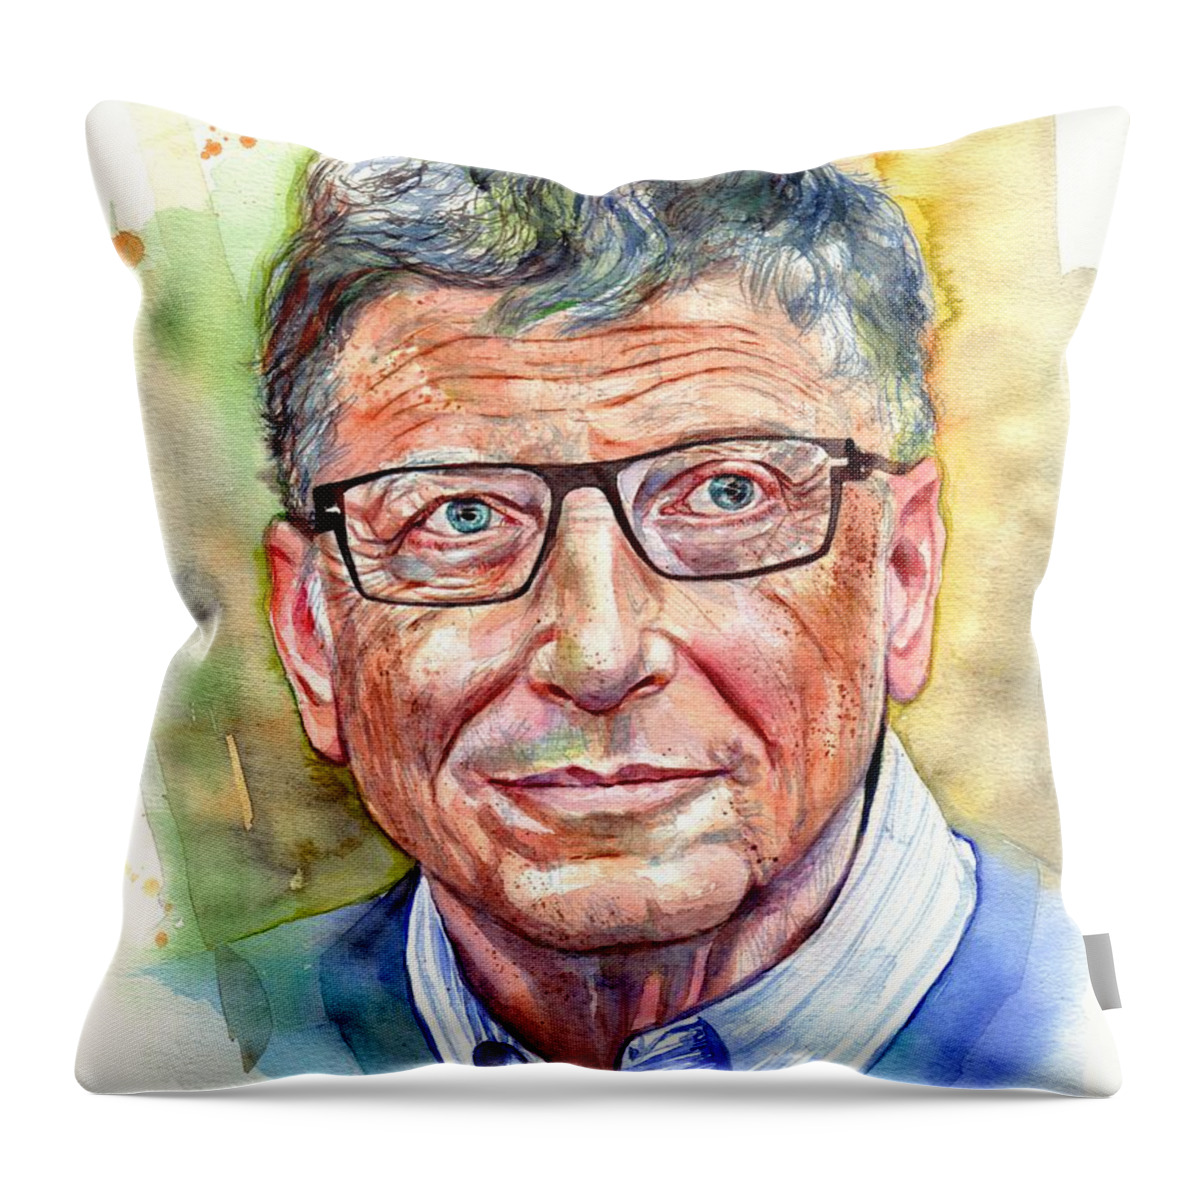 Bill Throw Pillow featuring the painting Bill Gates portrait by Suzann Sines